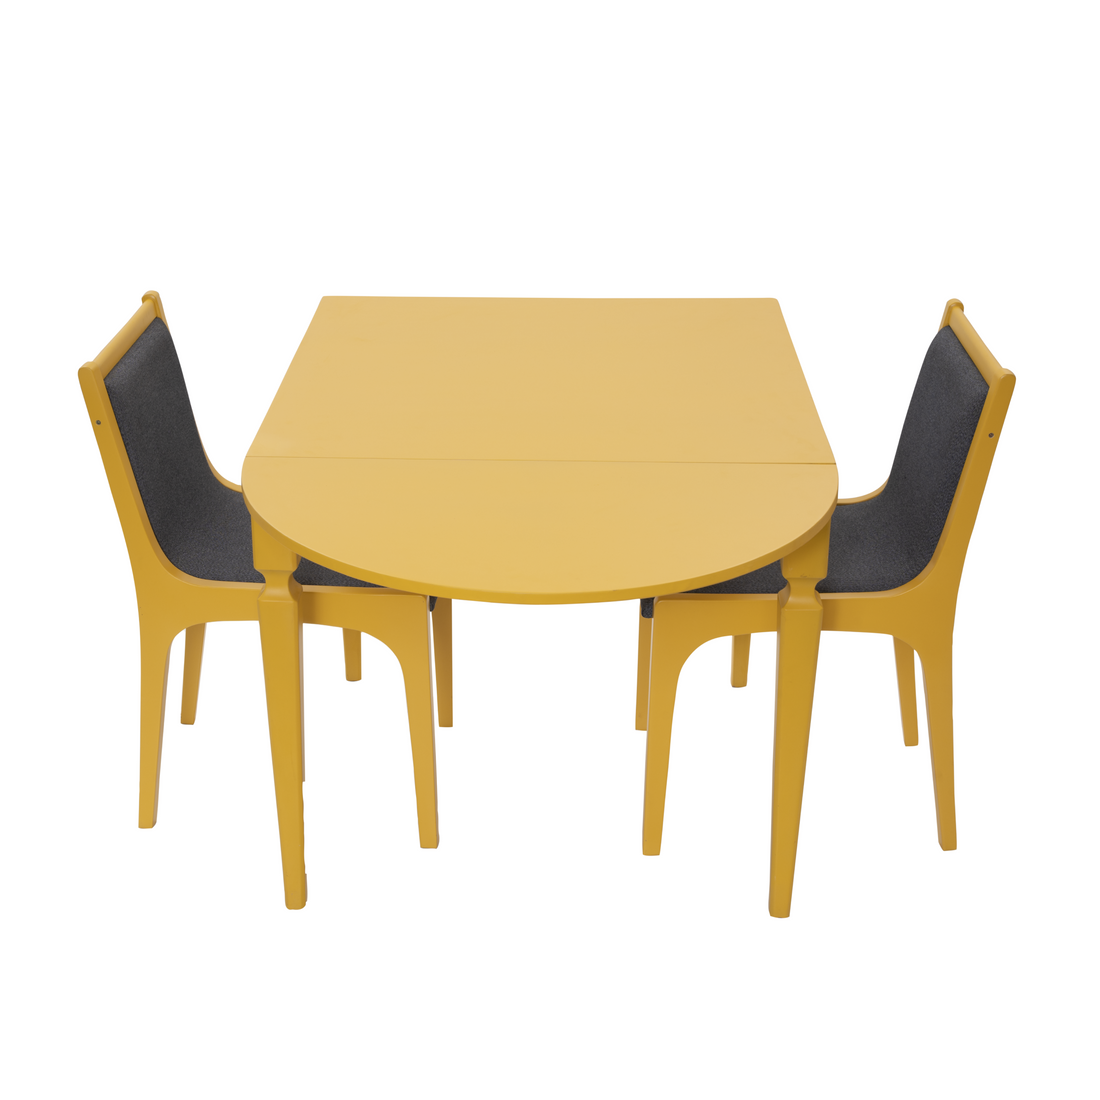 M21 Classic Dining Table with Leaf